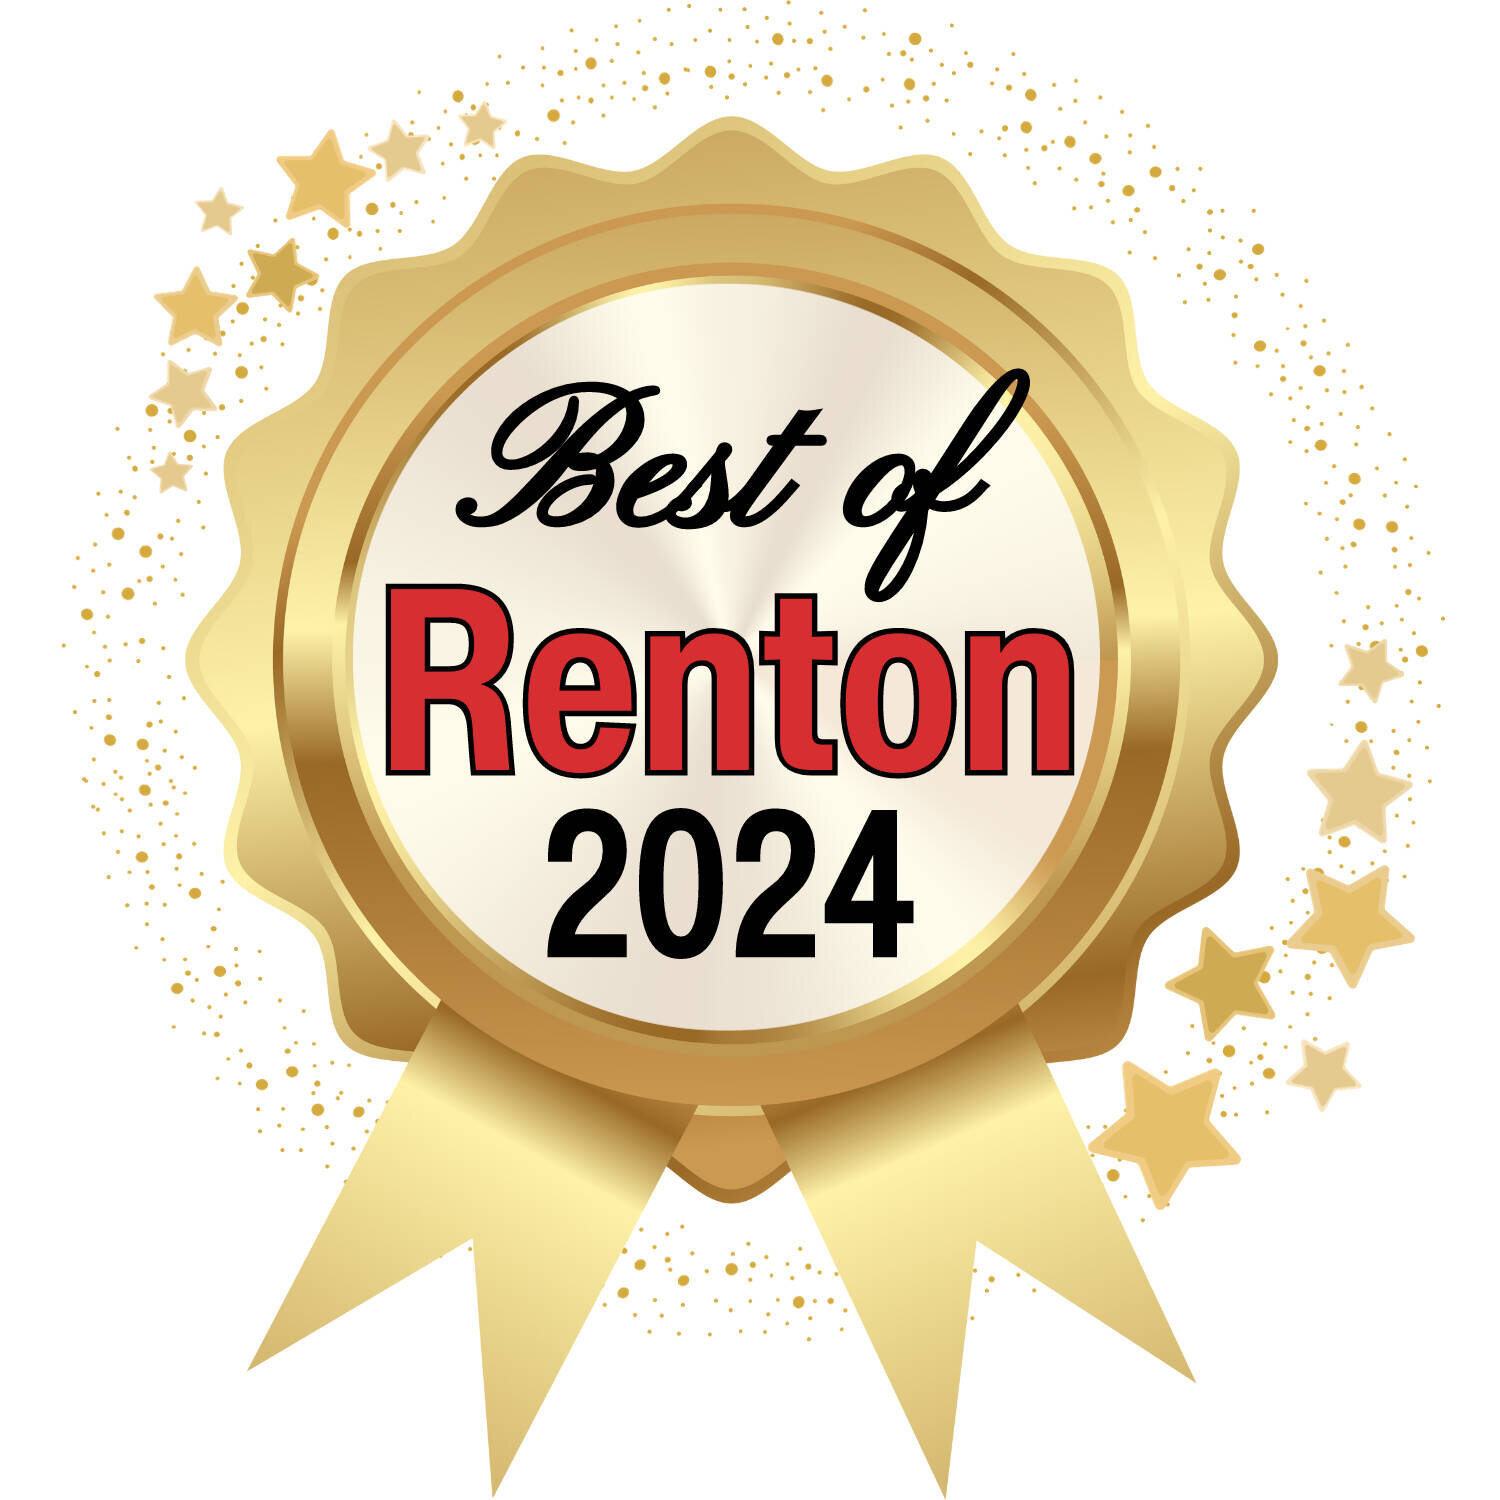 Cast your vote! 

I just finished voting in Best of Renton. It's a great way to show support to the small businesses you love, and help others find them too. 

Small businesses don't have millions of dollars (or the time) to spend on big advertising 